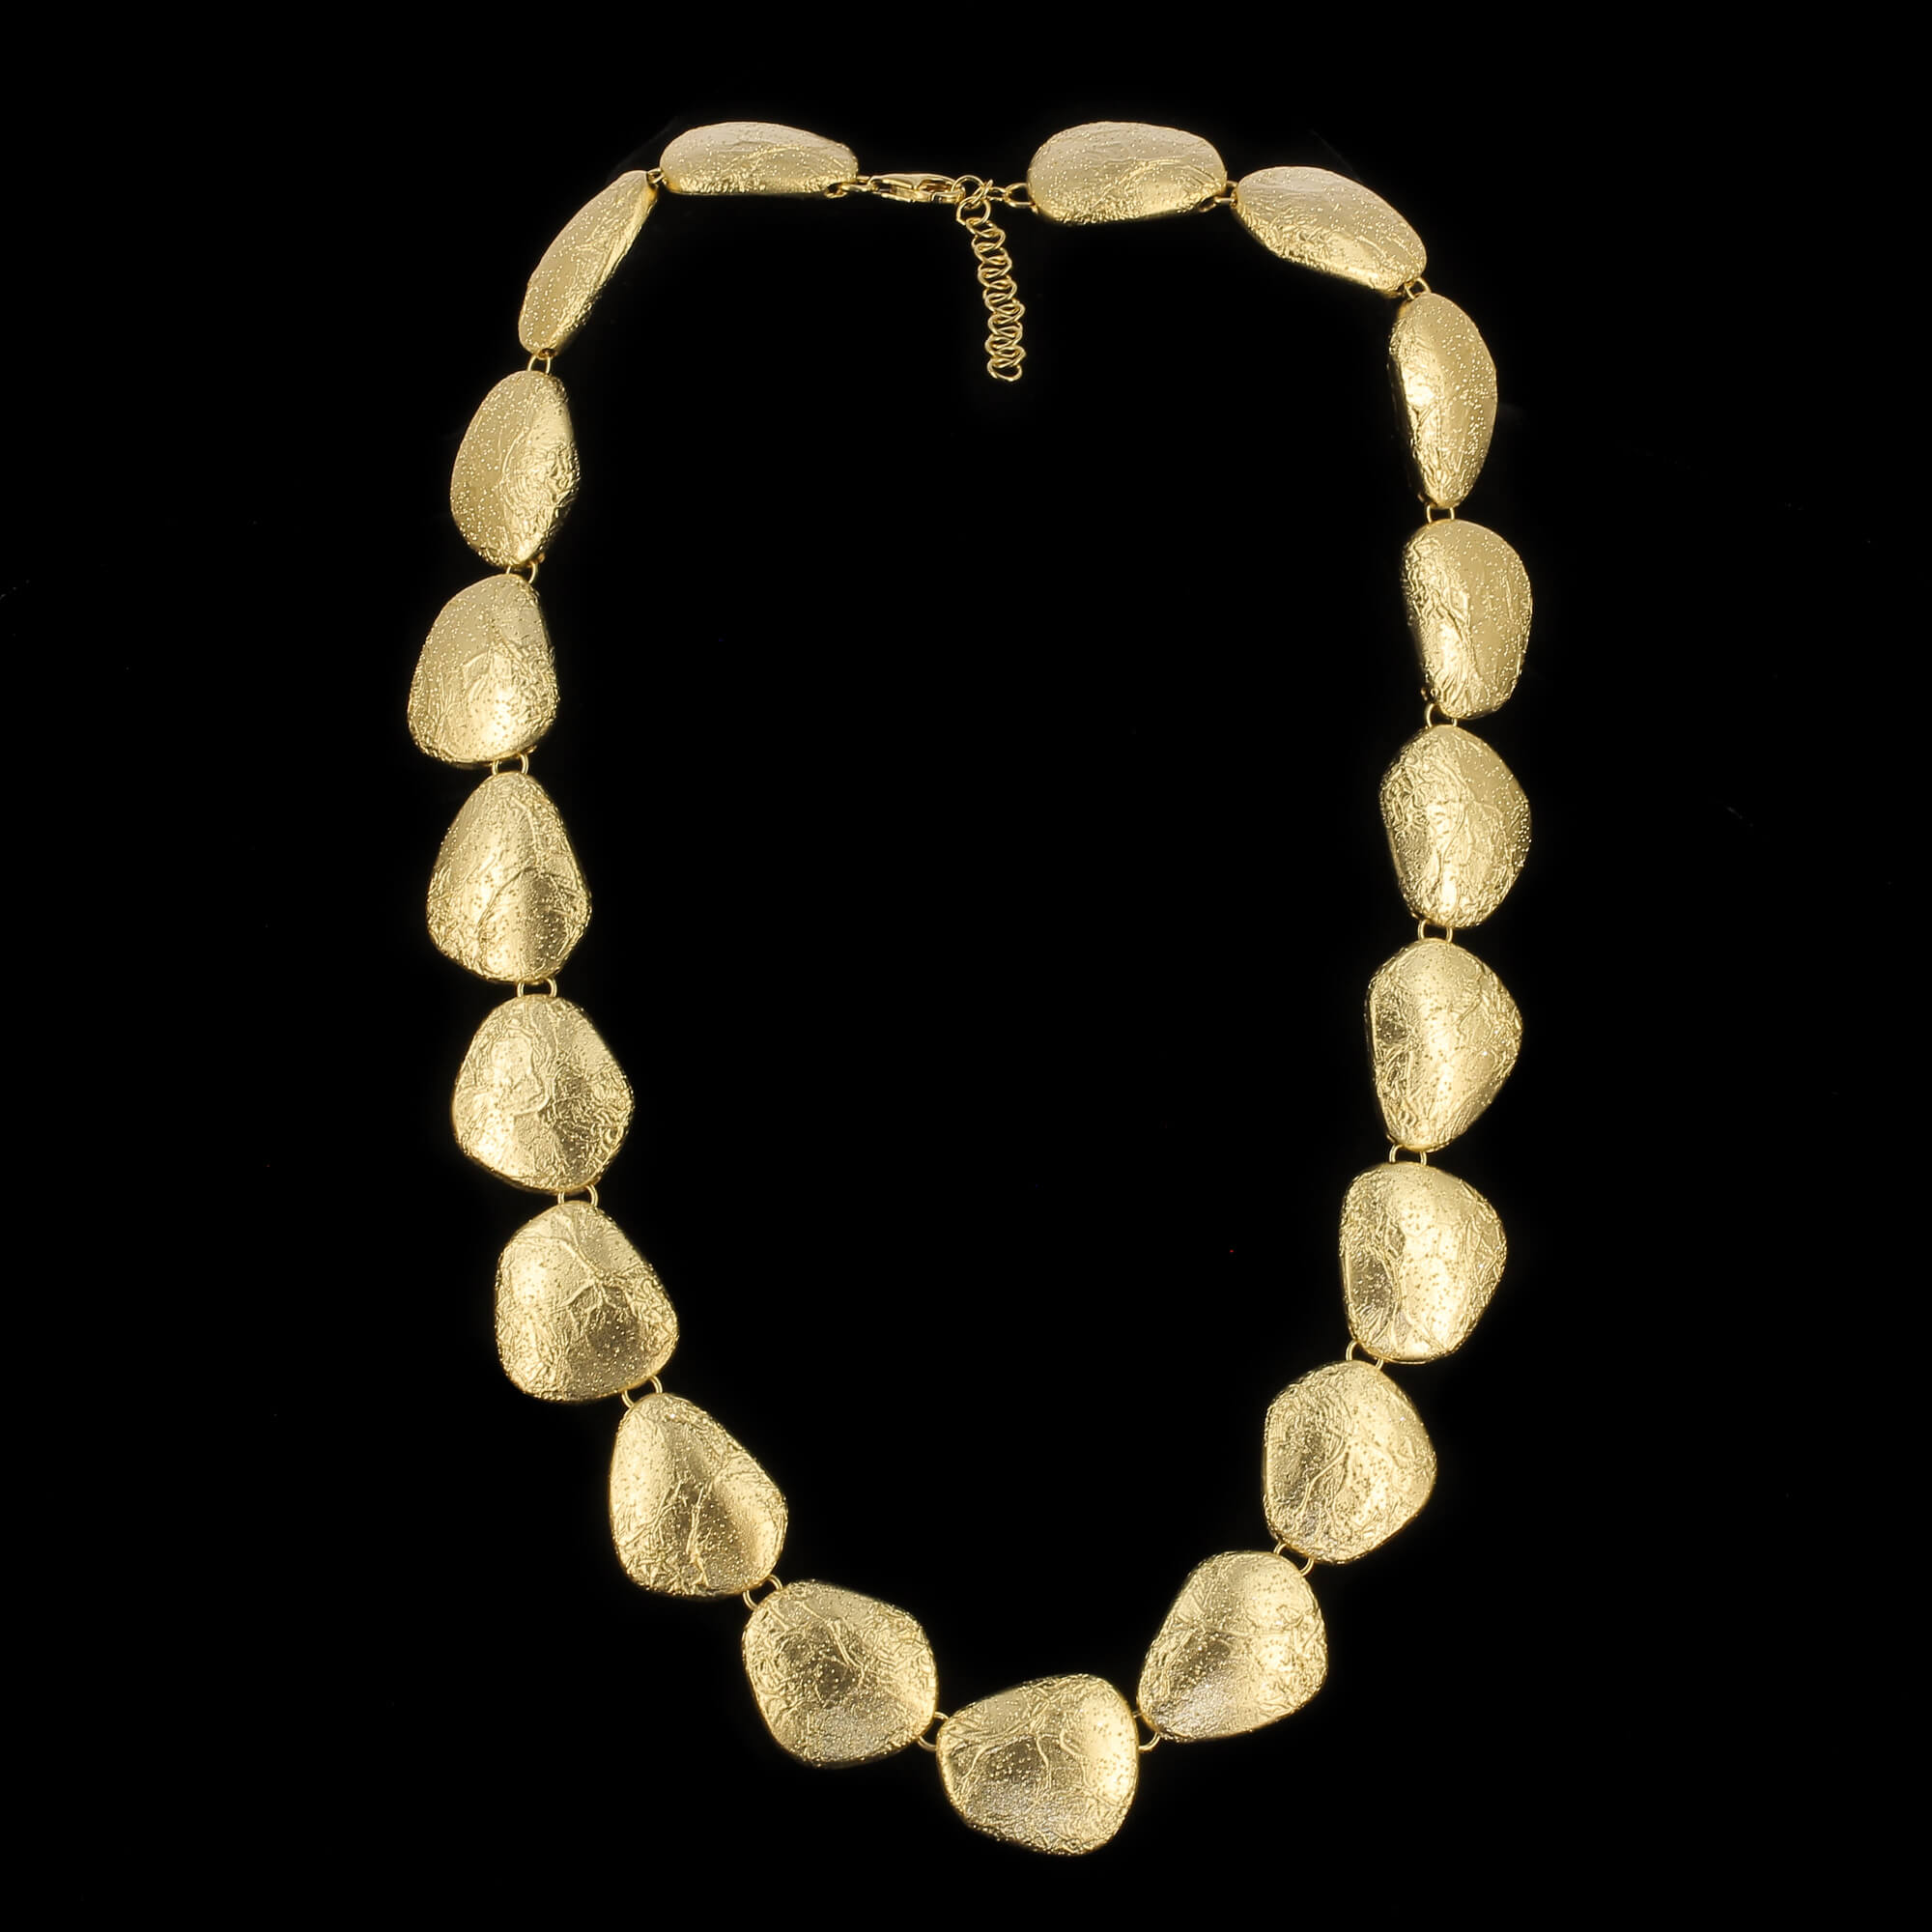 Gold-plated and diamond necklace with design of coffee beans